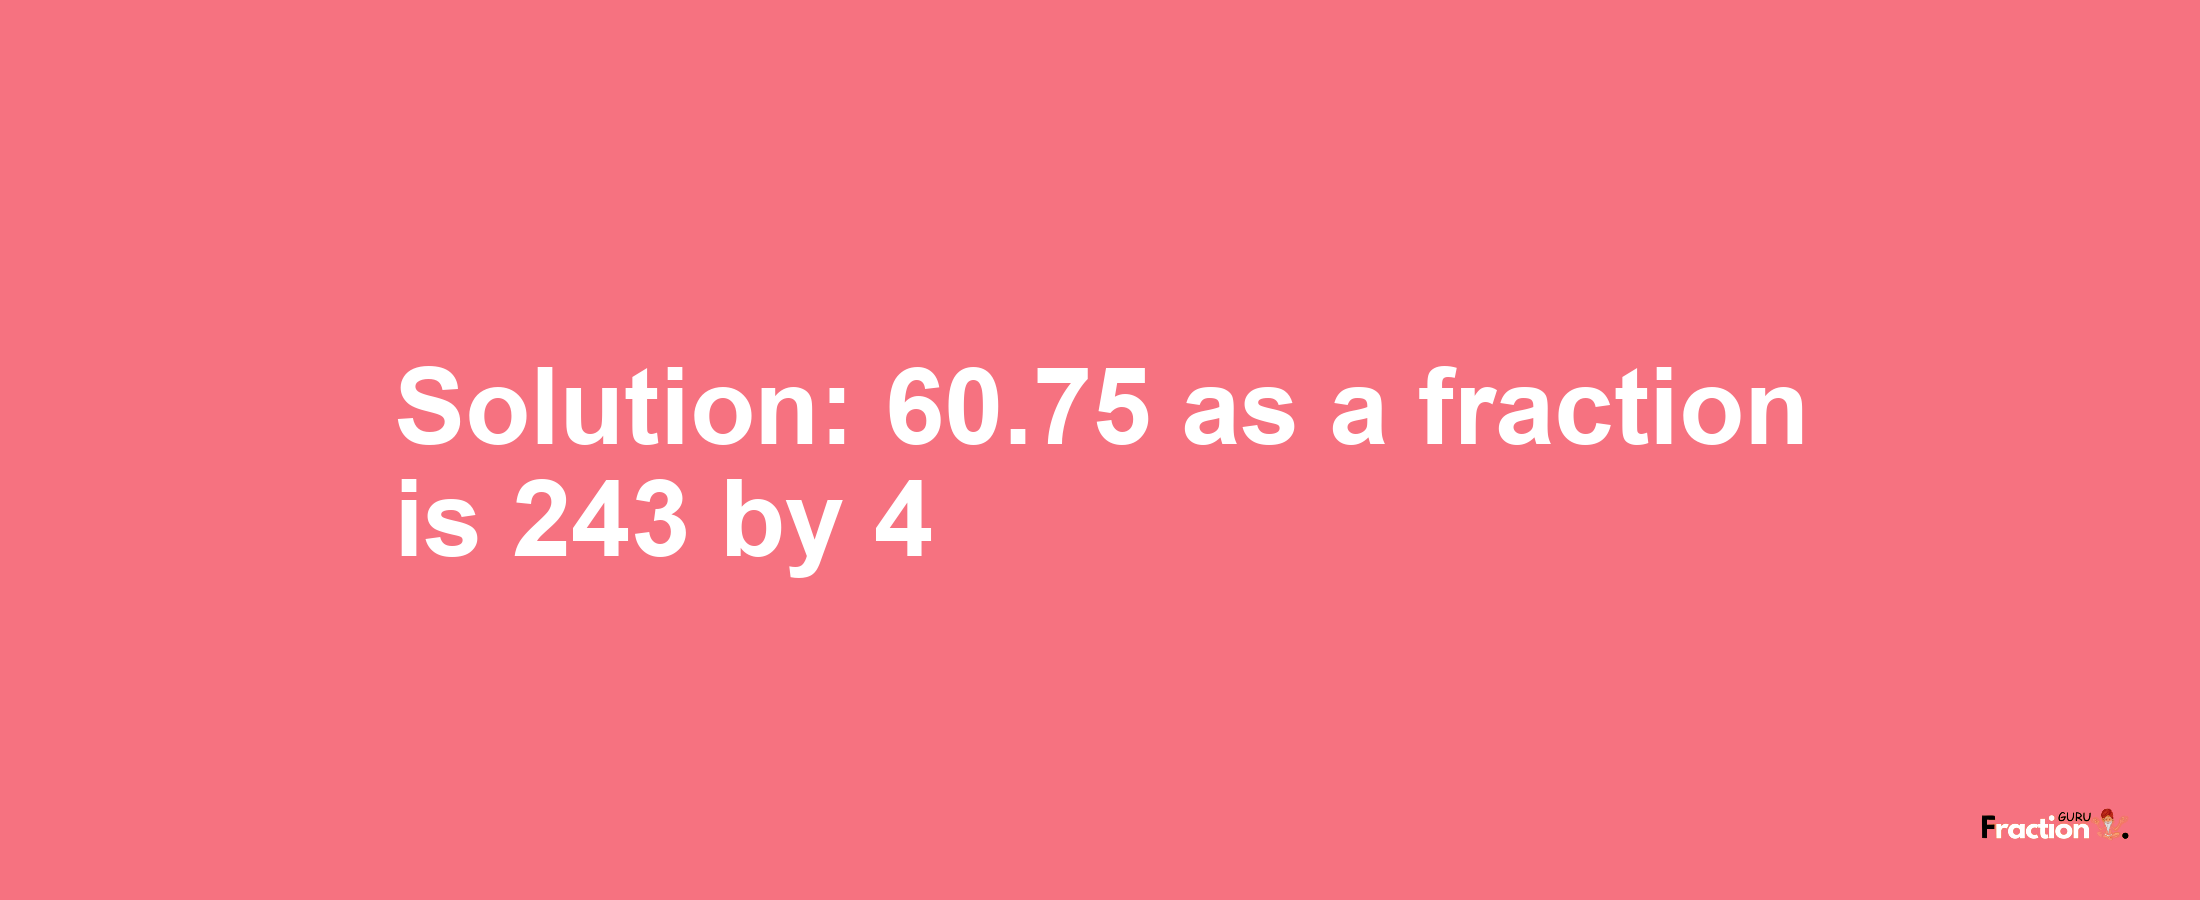 Solution:60.75 as a fraction is 243/4